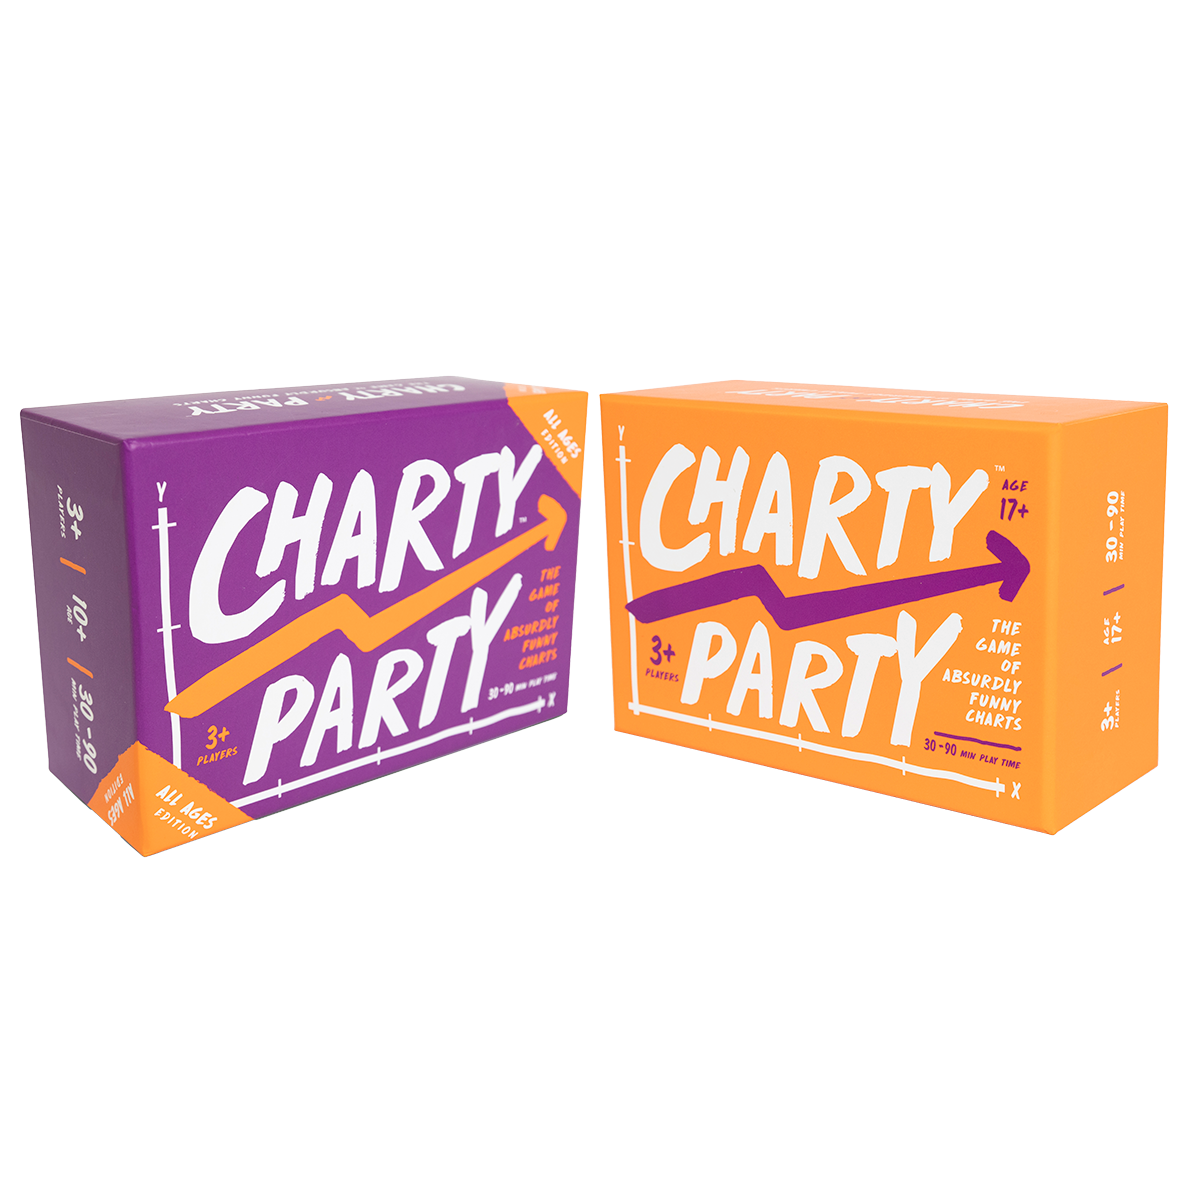 Charty Party Original + Charty Party All Ages Bundle!